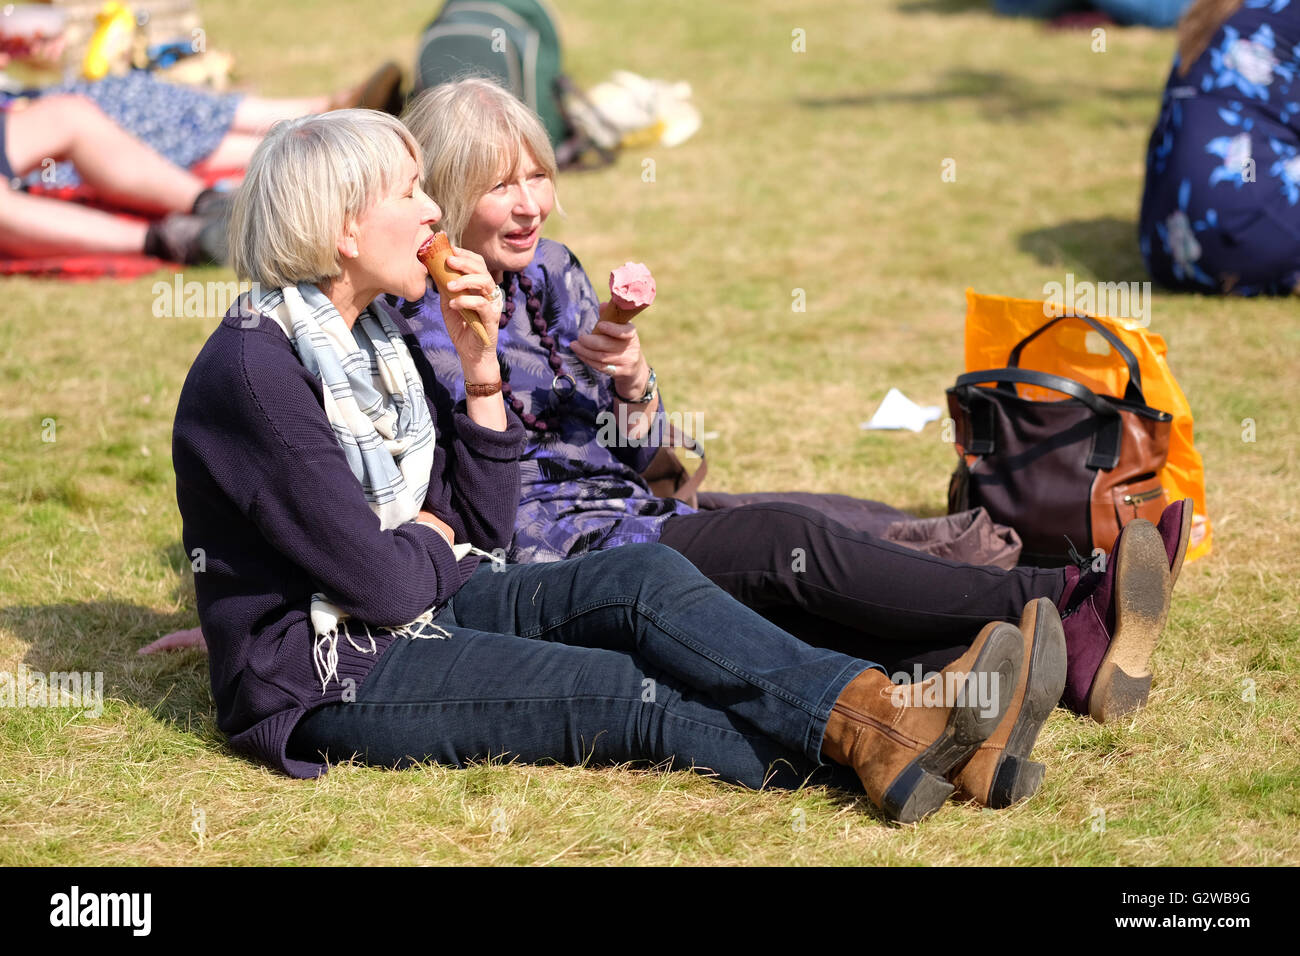 Hay Festival, Wales, UK - June 2016 -  Another very hot and sunny day at the Hay Festival with temperatures up to 20c. Two friends sit and enjoy their delicious Shepherds sheep milk ice cream on the Festival grass lawns. Stock Photo